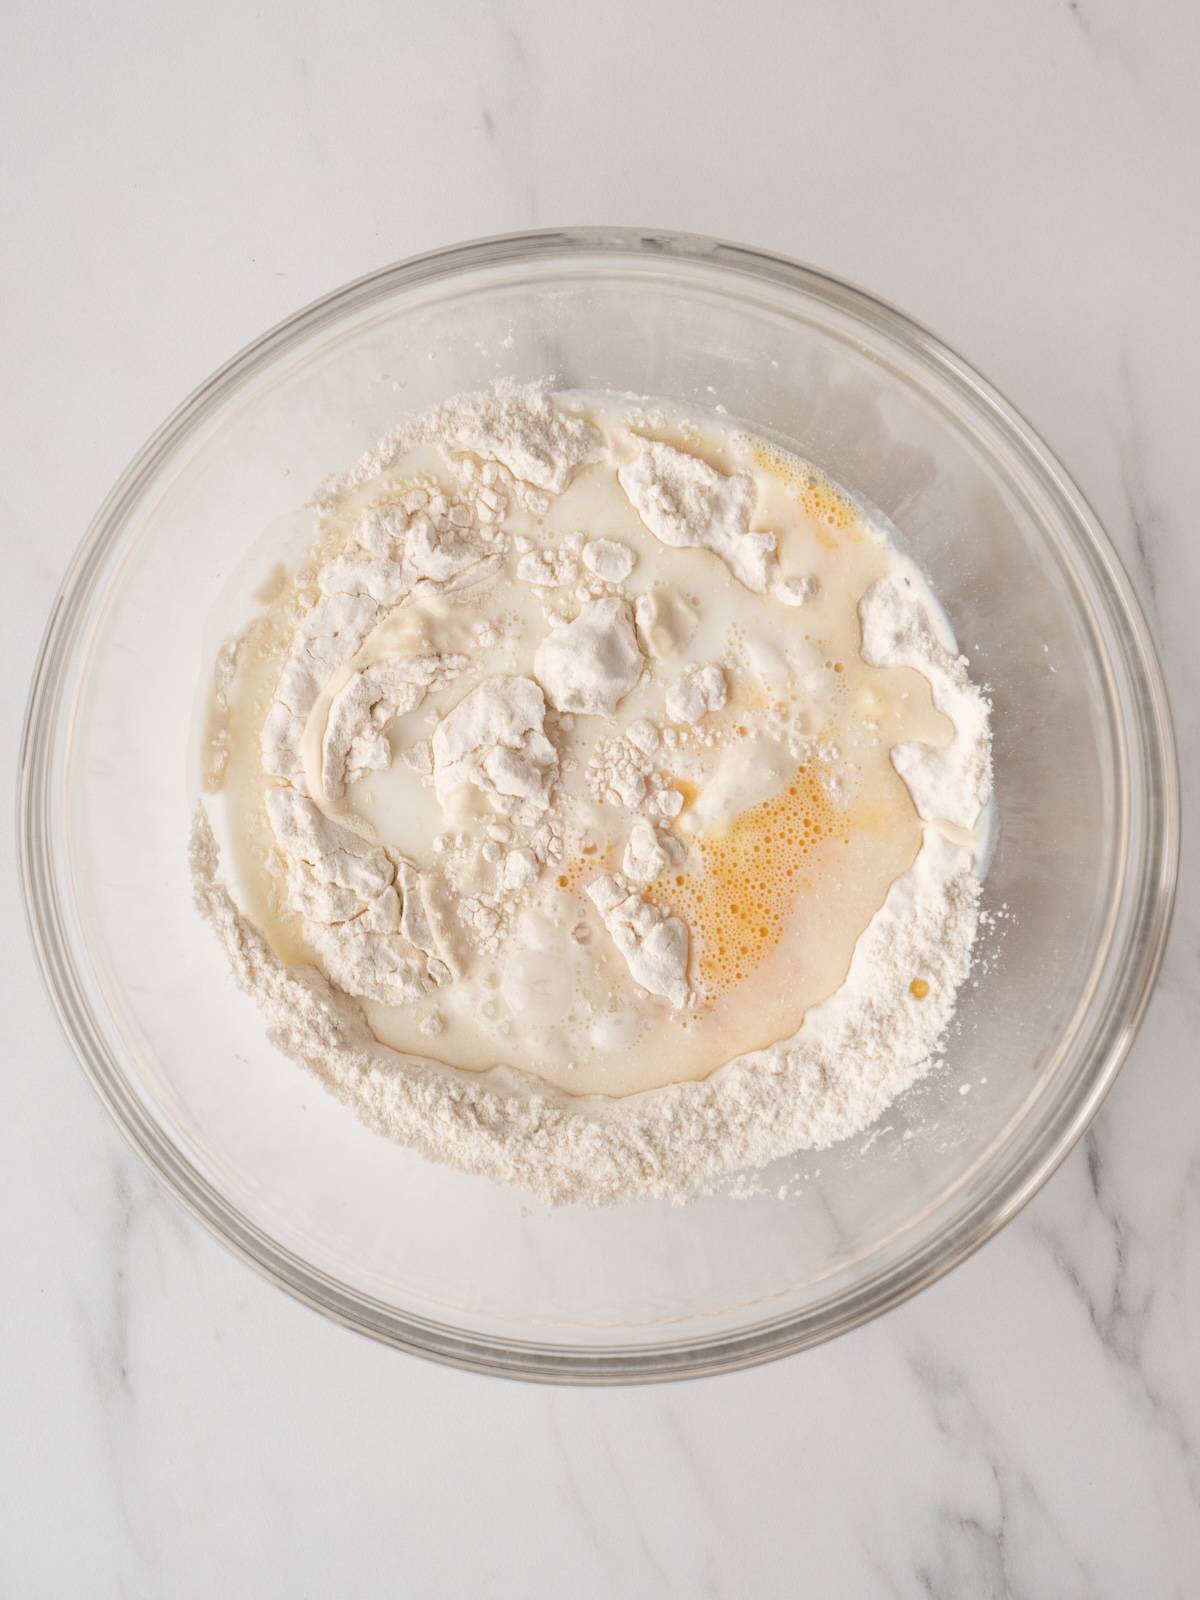 A large glass mixing bowl with flour and baking powder mix, with milk and egg added.